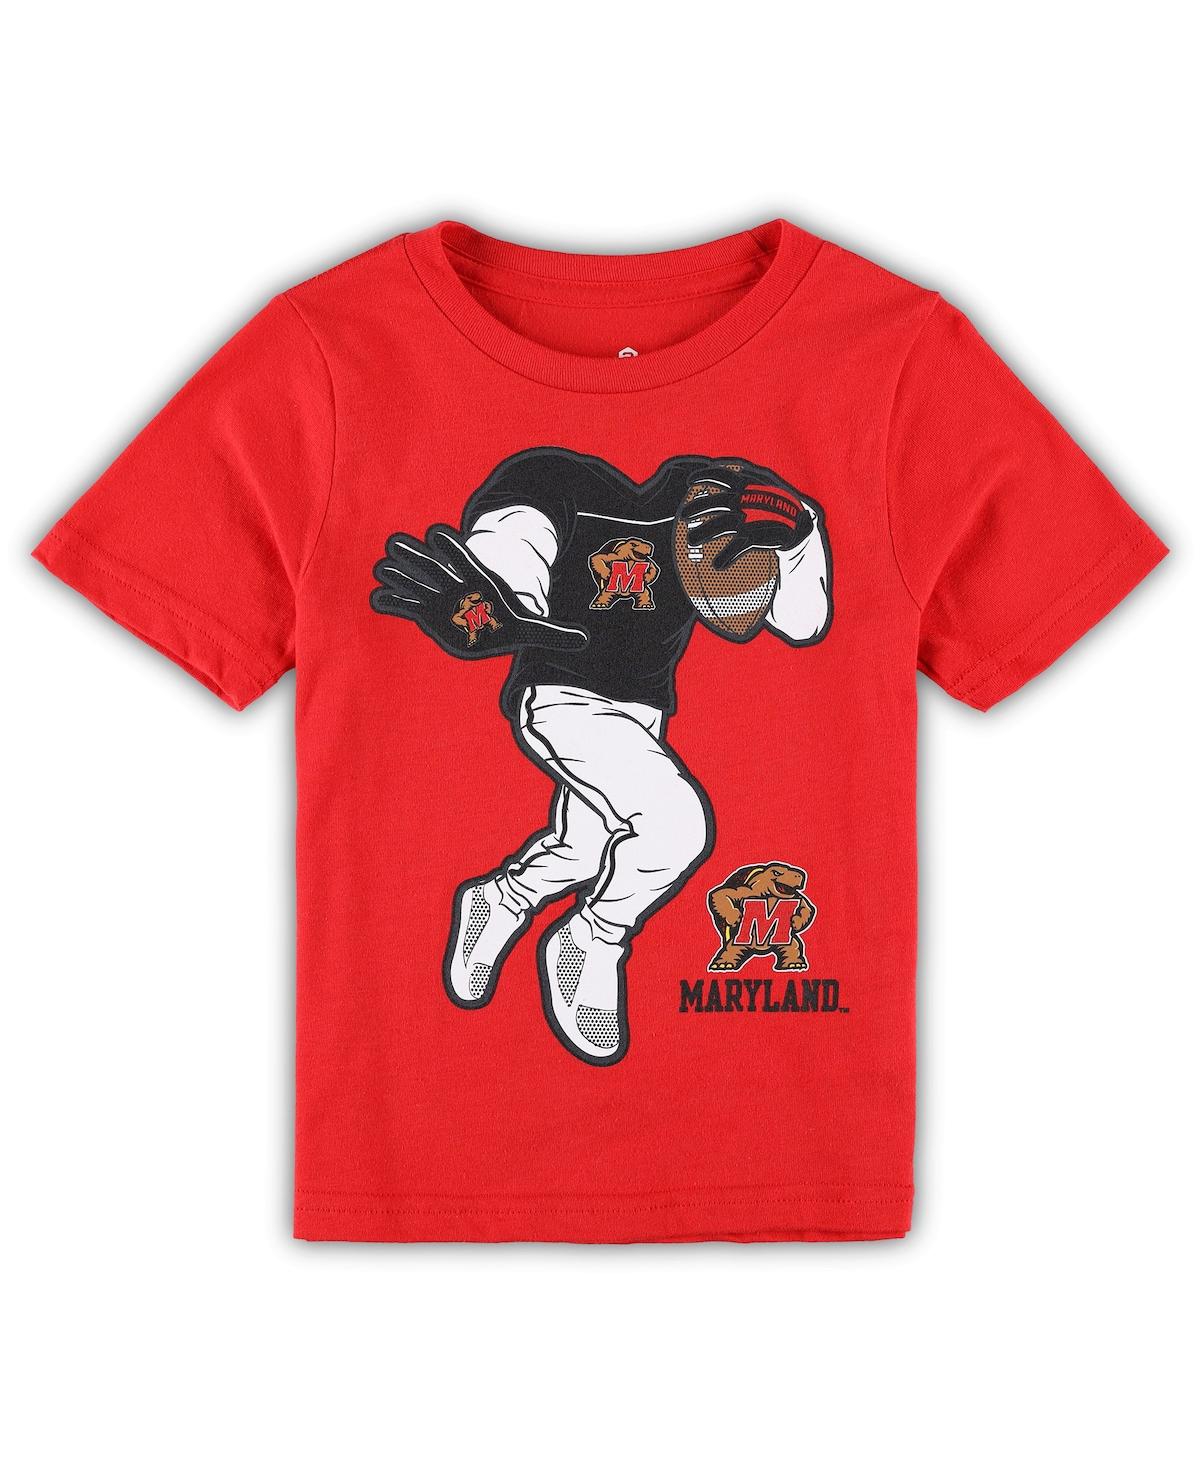 Shop Outerstuff Toddler Boys And Girls Red Maryland Terrapins Stiff Arm T-shirt